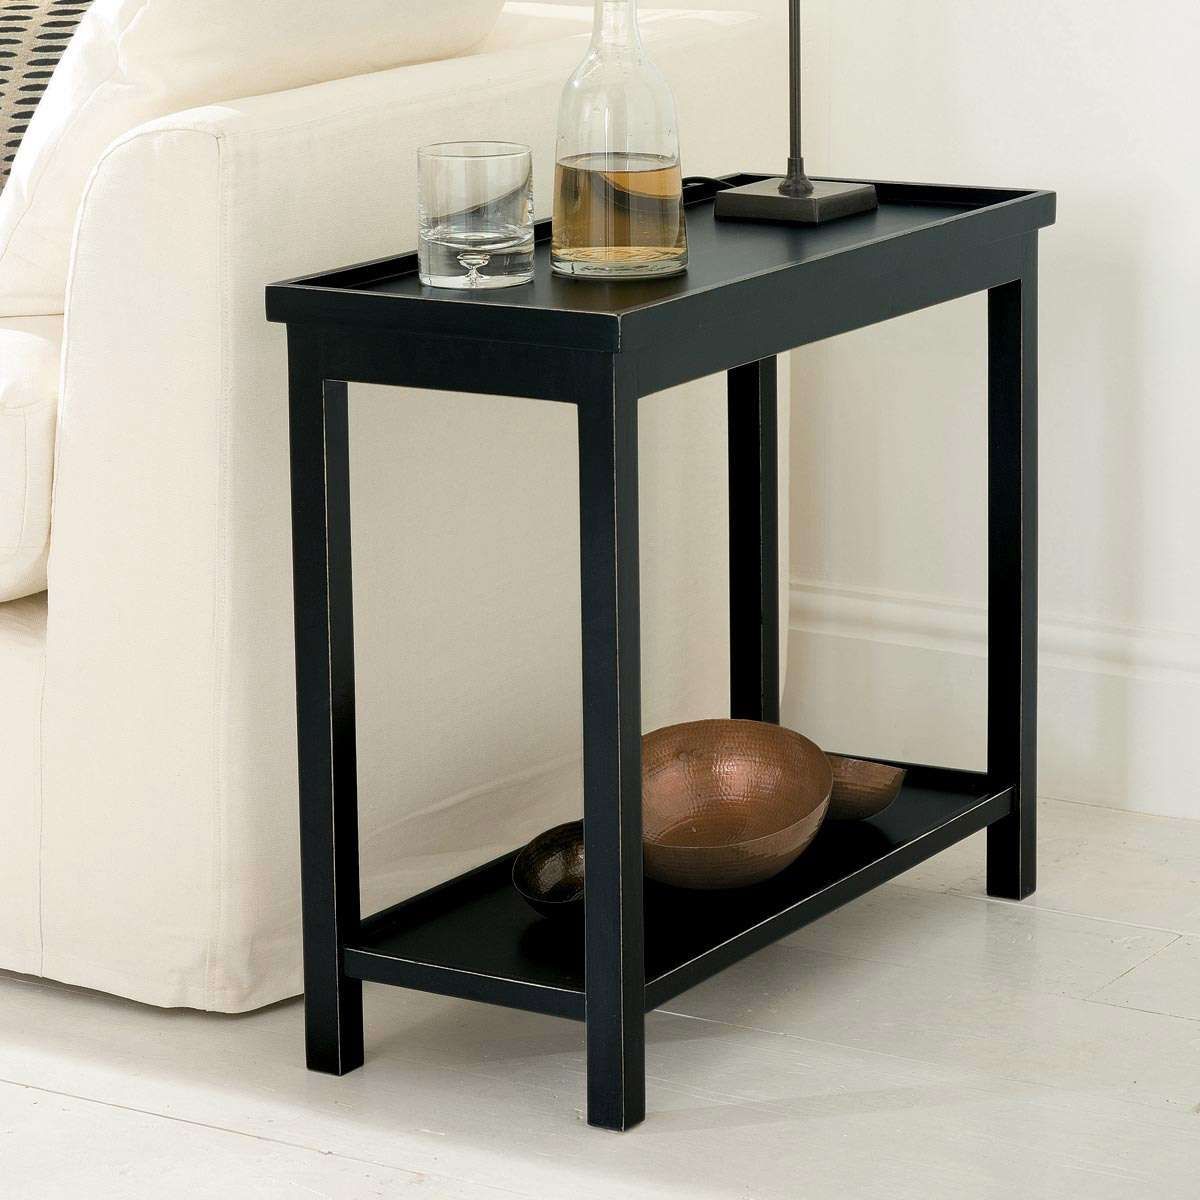 Small Contemporary Coffee Tables Shelf : Practical And Stylish In Trendy Small Coffee Tables With Shelf (View 7 of 20)